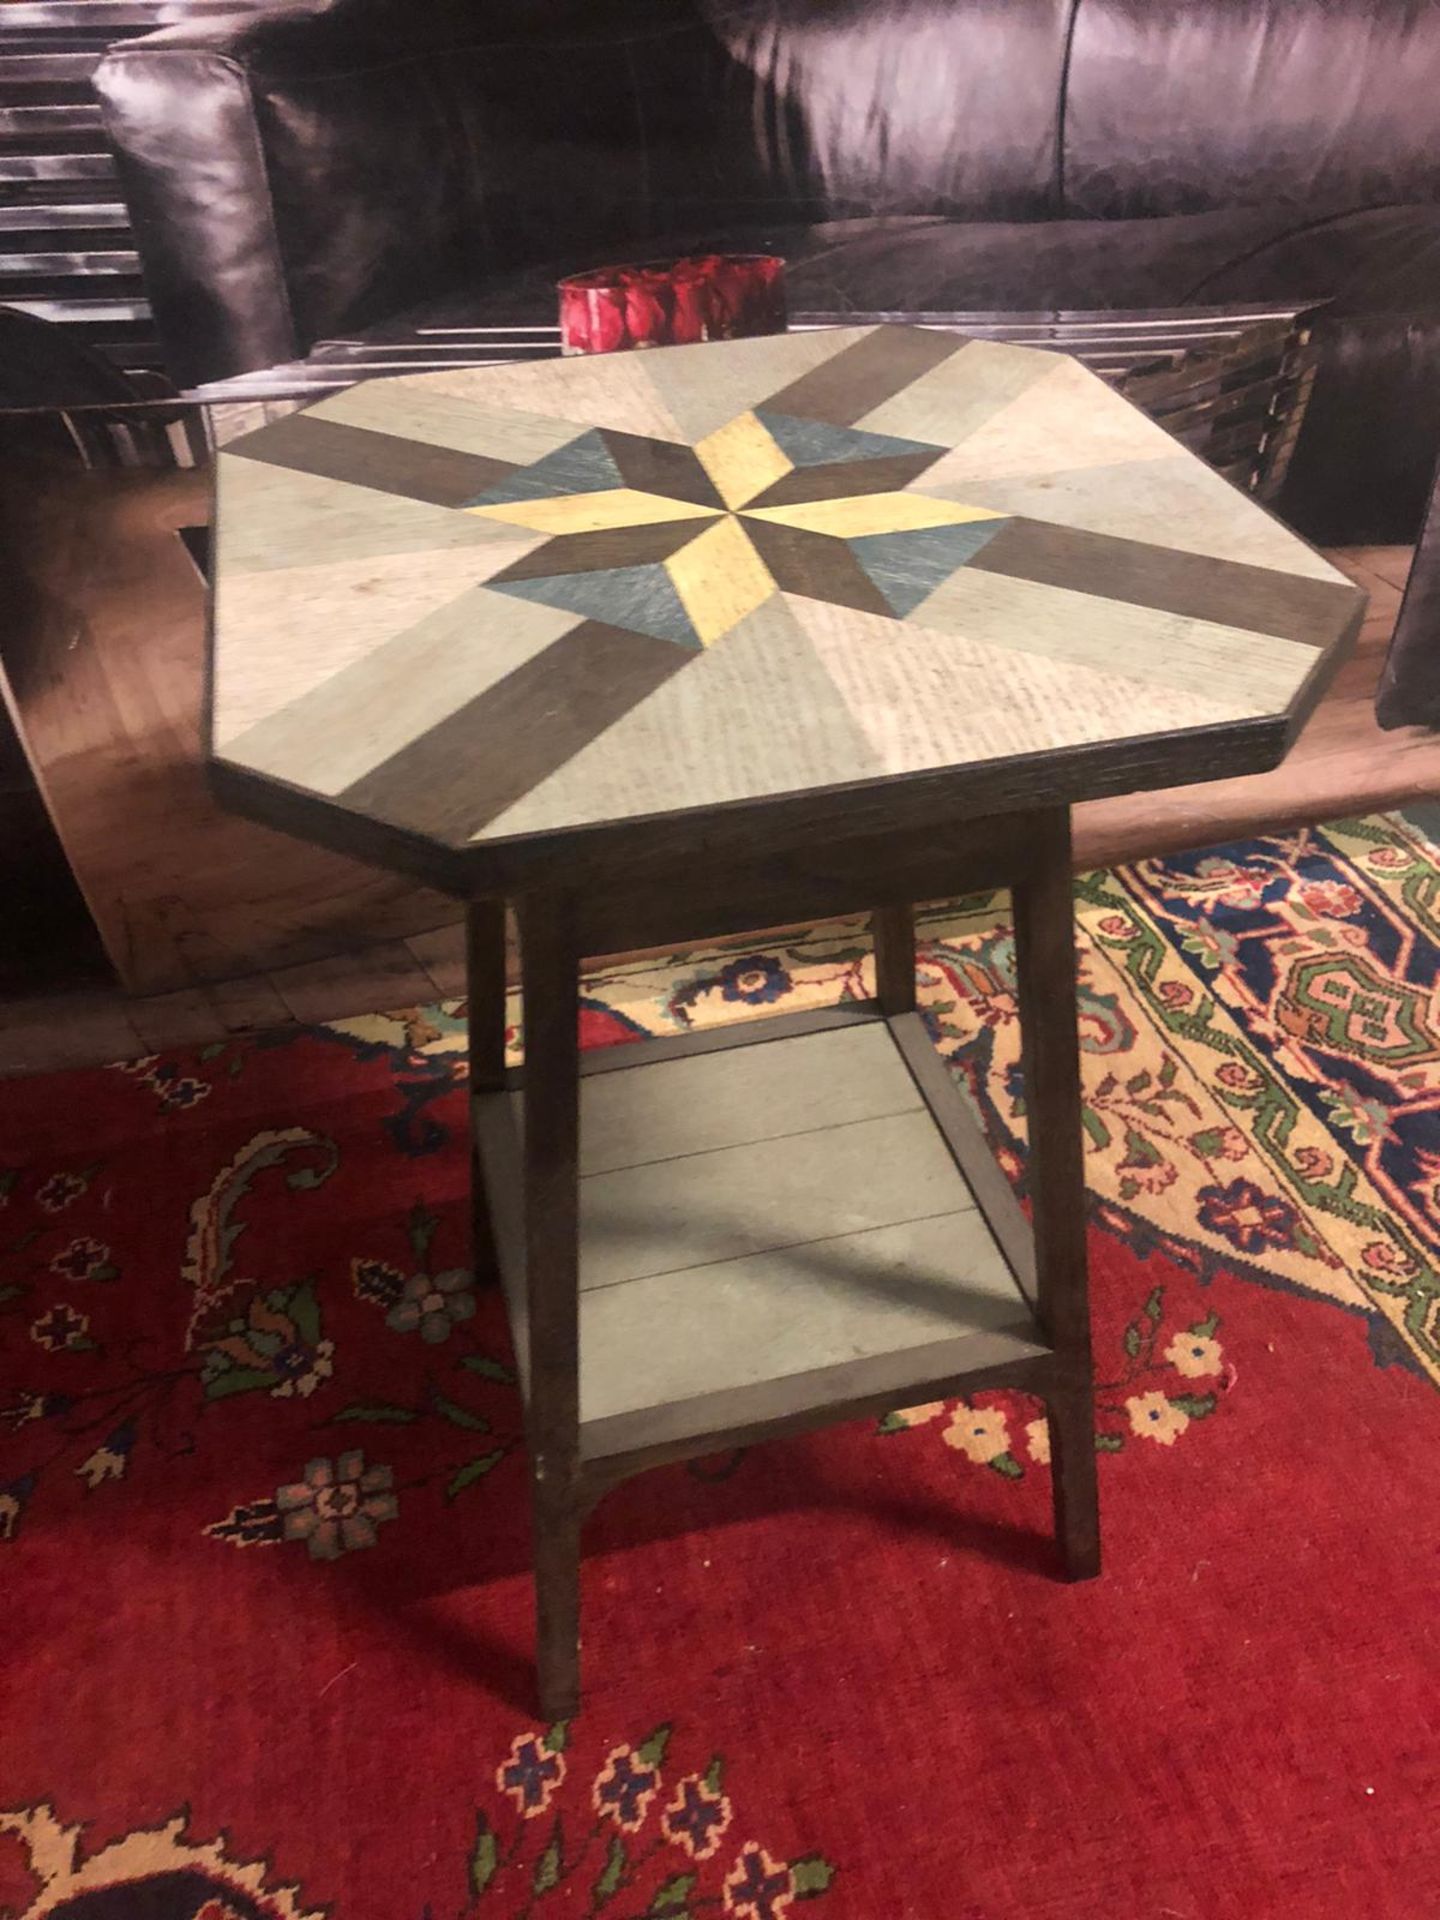 Geometric Top Side Table With Undershelf Works Great As A Lamp TableÂ  From Sideshow To Show-